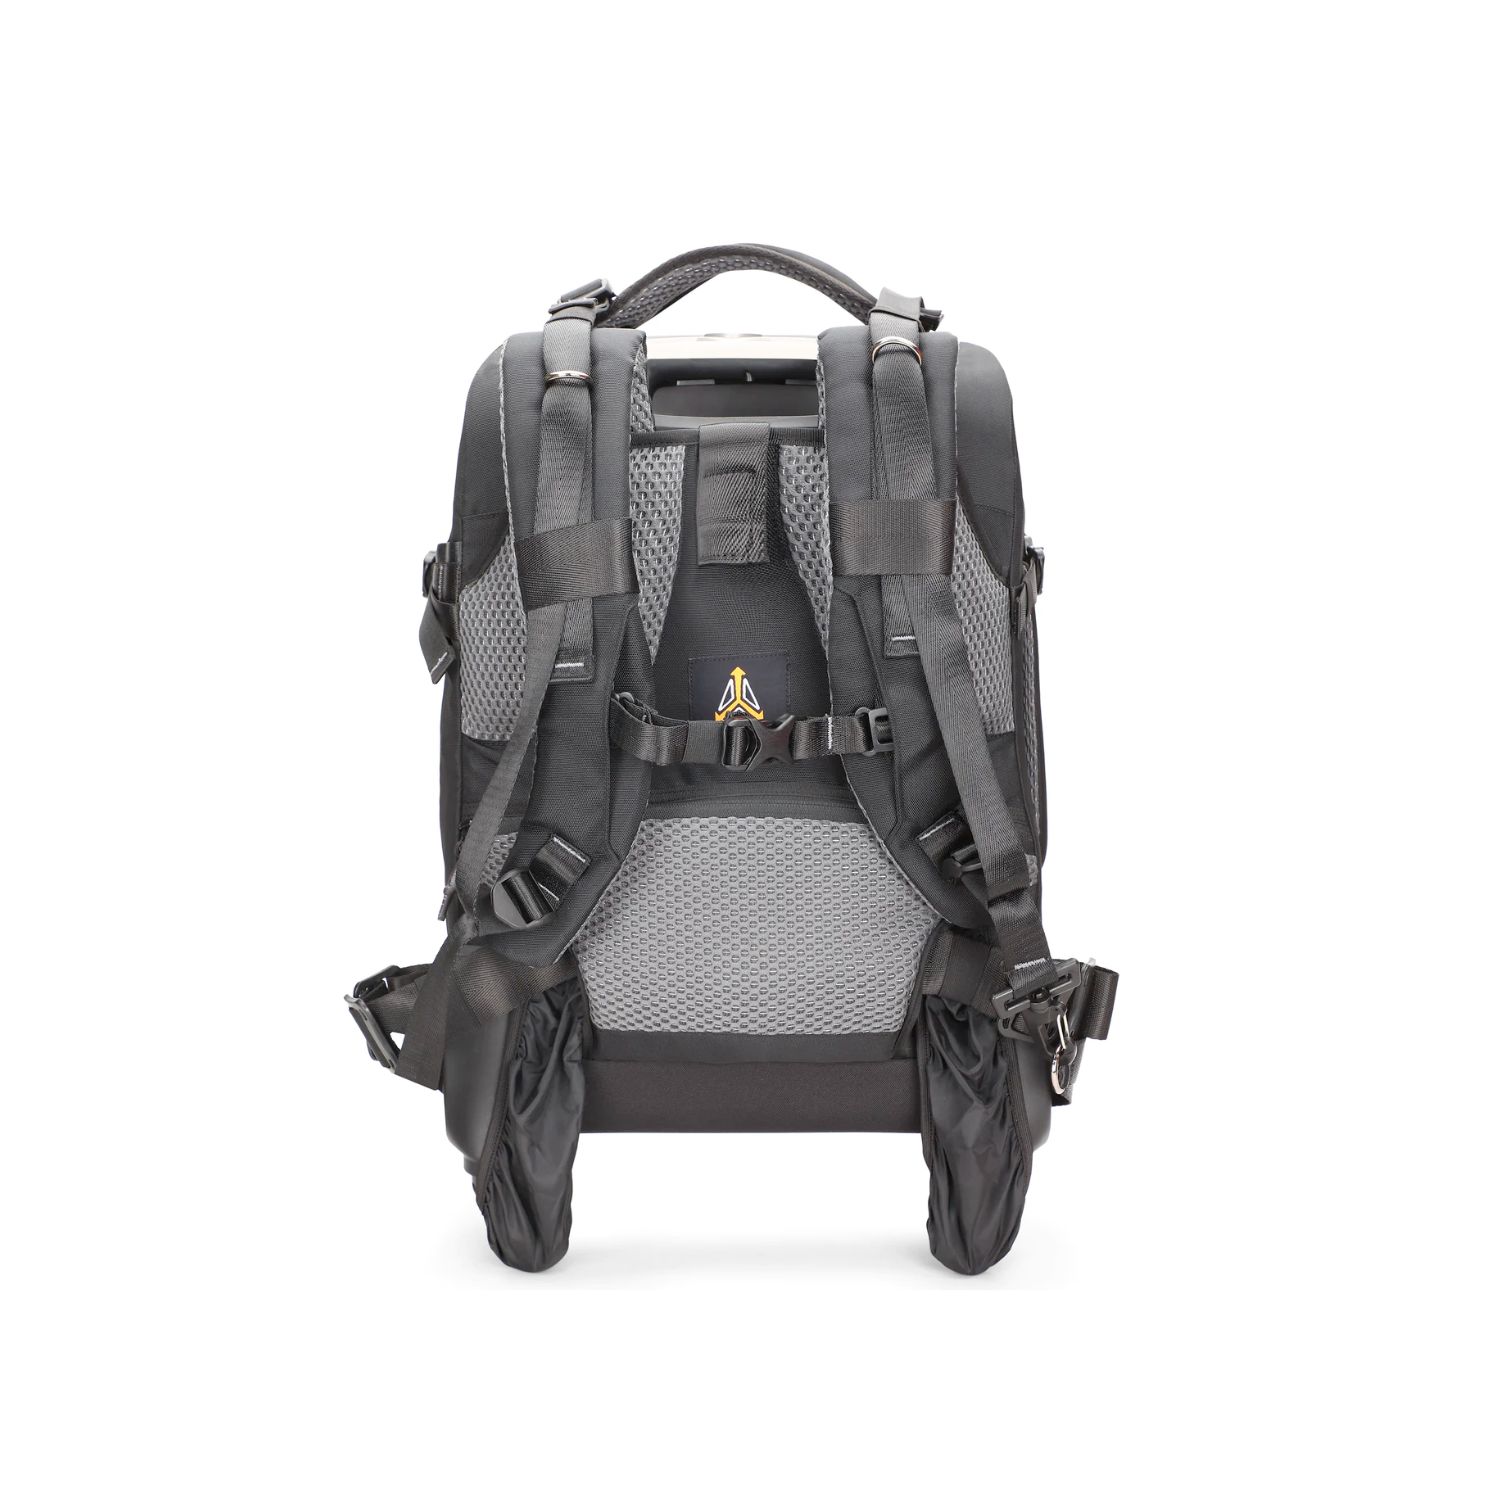 MBOSS Faux Leather 2 Wheel Overnighter Laptop Trolley Travel Bag Buy MBOSS  Faux Leather 2 Wheel Overnighter Laptop Trolley Travel Bag Online at Best Price  in India  Nykaa